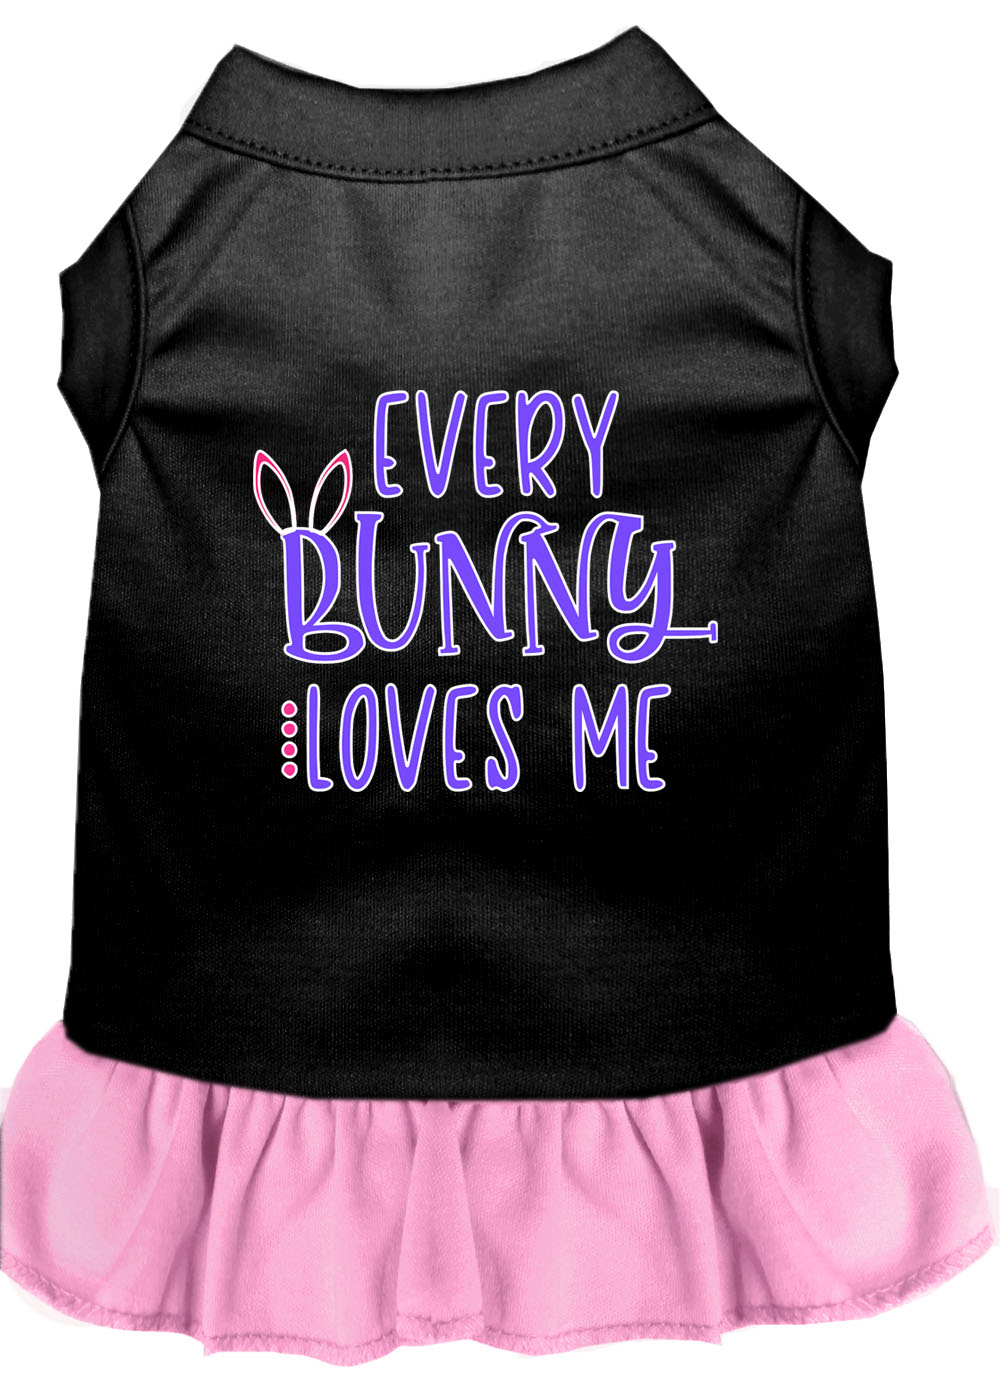 Every Bunny Loves me Screen Print Dog Dress Black with Light Pink Sm